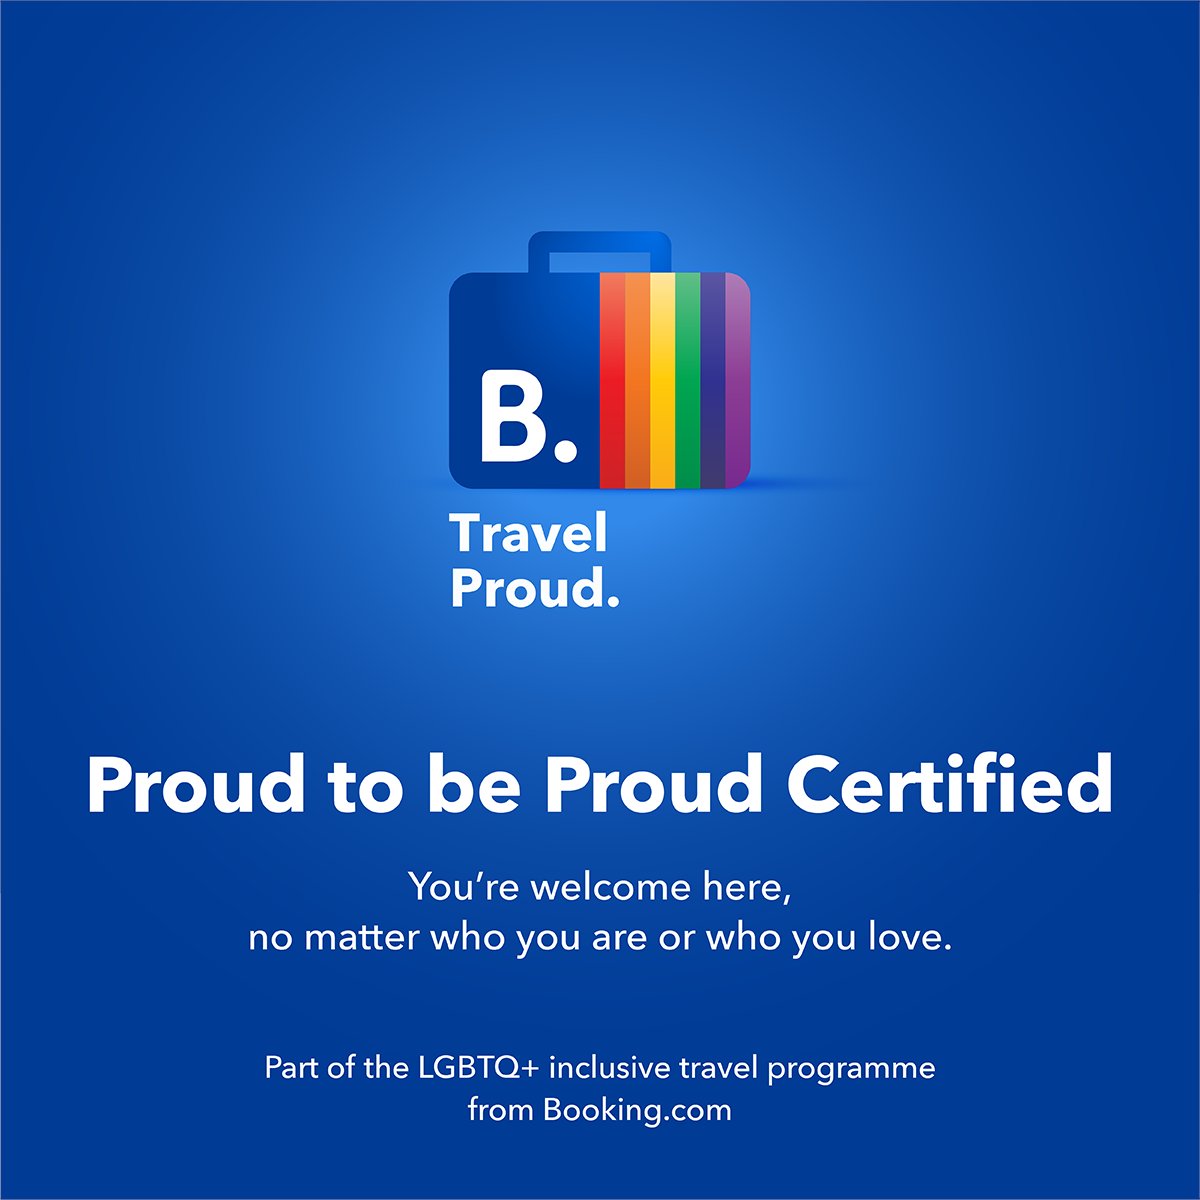 We’re committed to offering inclusive hospitality for our LGBTQ+ guests, so we’ve completed training to become Proud Certified. Everyone is welcome and free to be themselves here – no matter who they are or they love. #TravelProud #ProudCertified #ProudHospitality